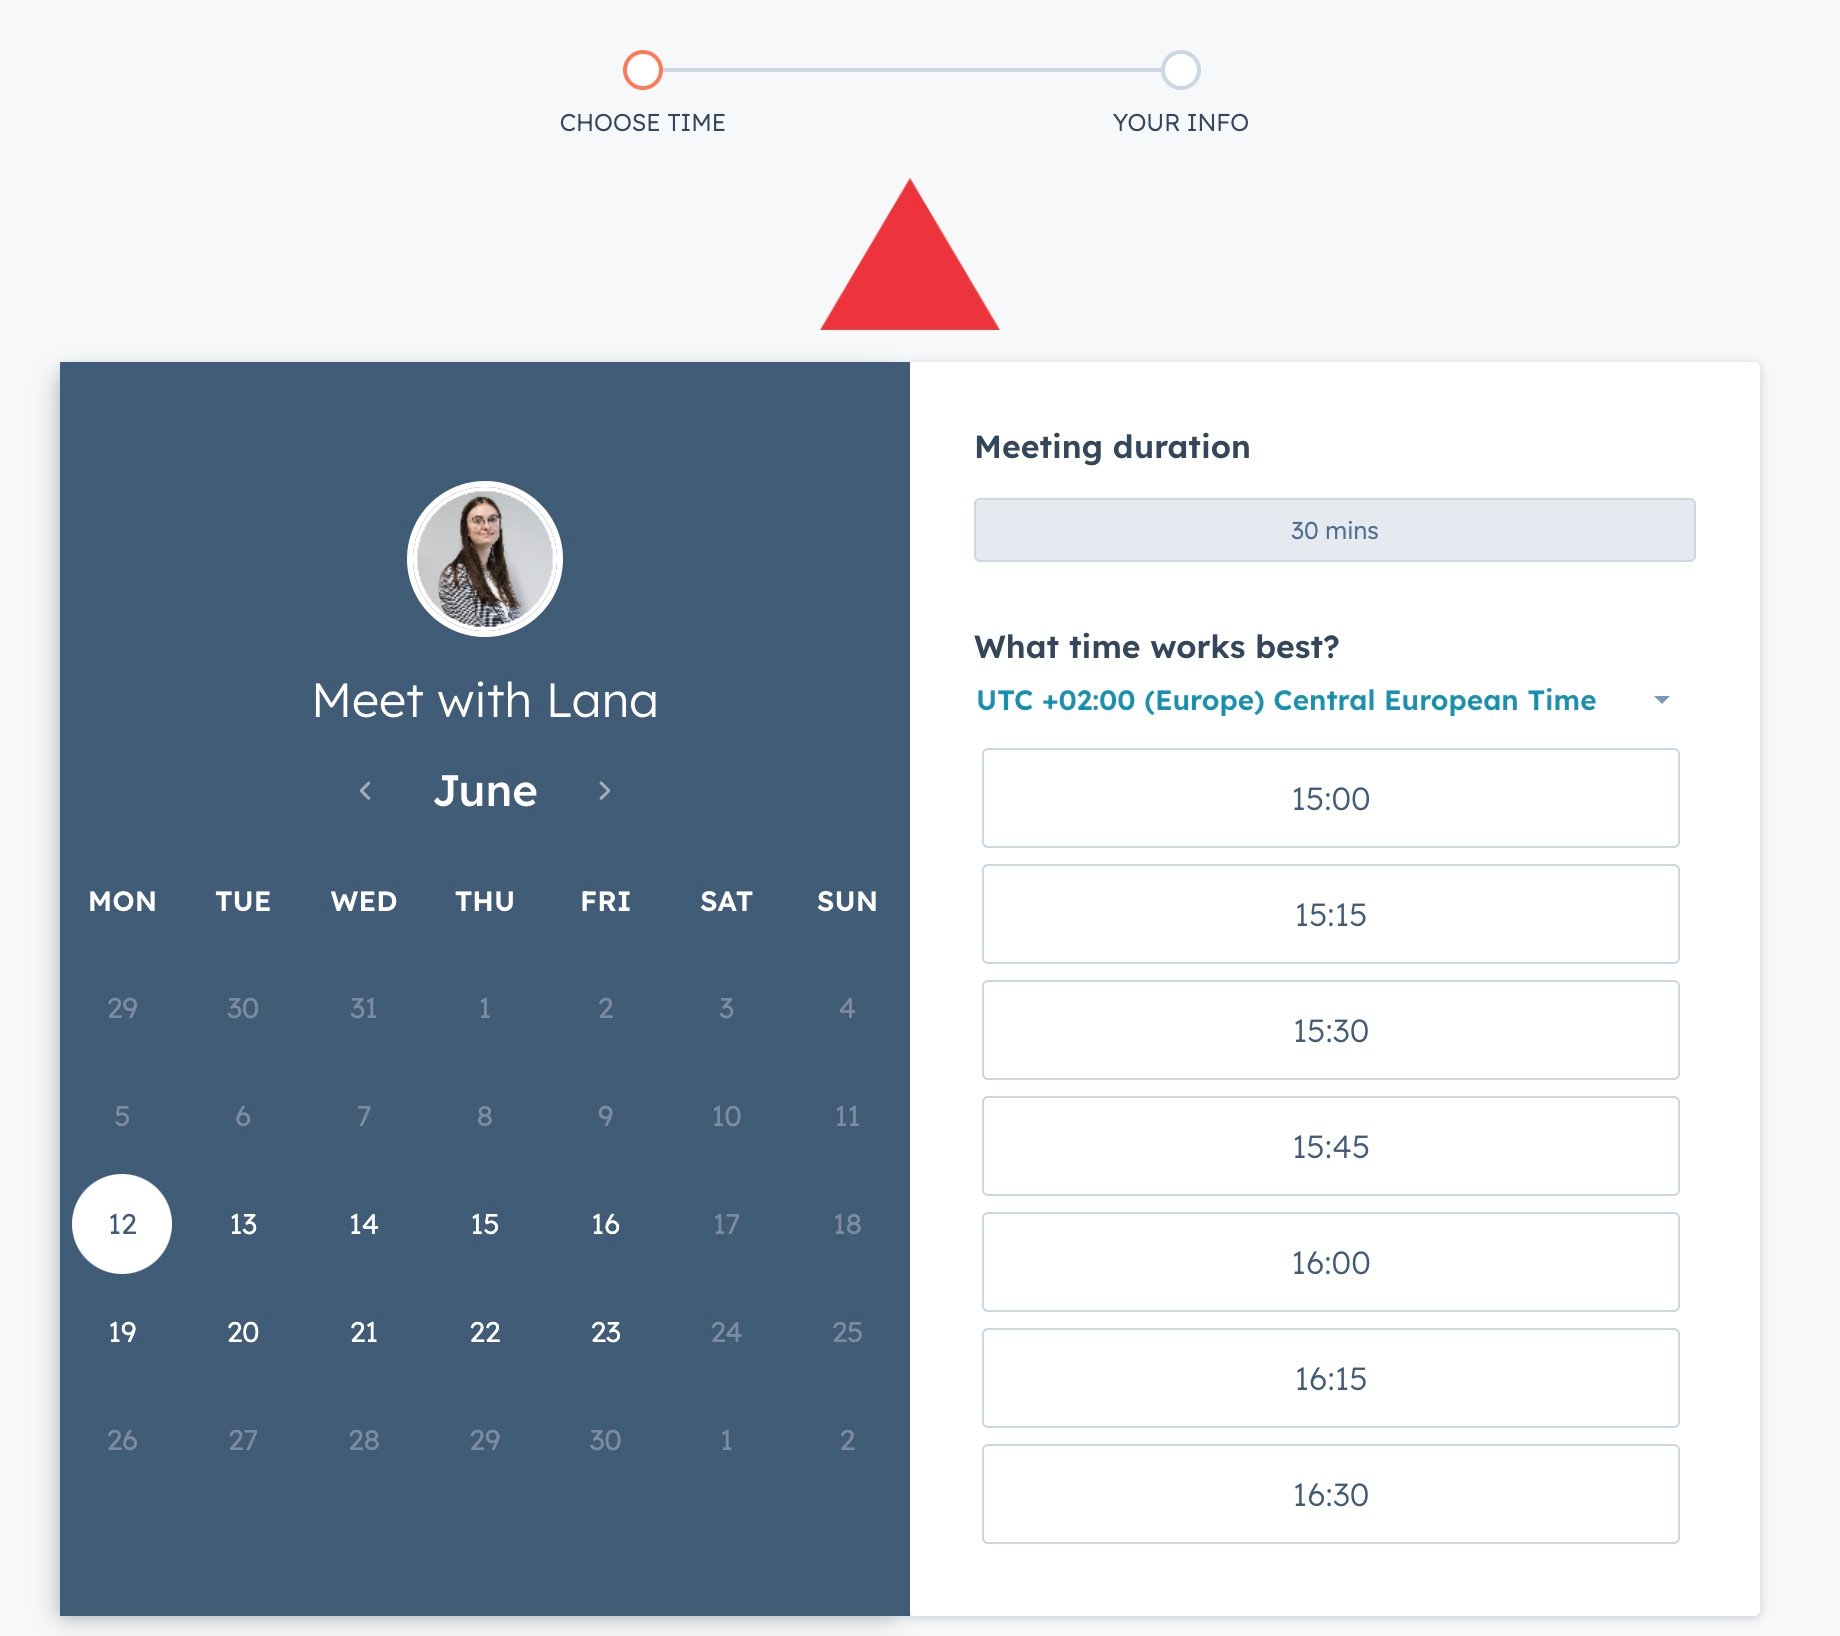  Meeting Scheduling Page: Include a screenshot of the meeting scheduling page, displaying the available time slots and the form for prospects to fill in.